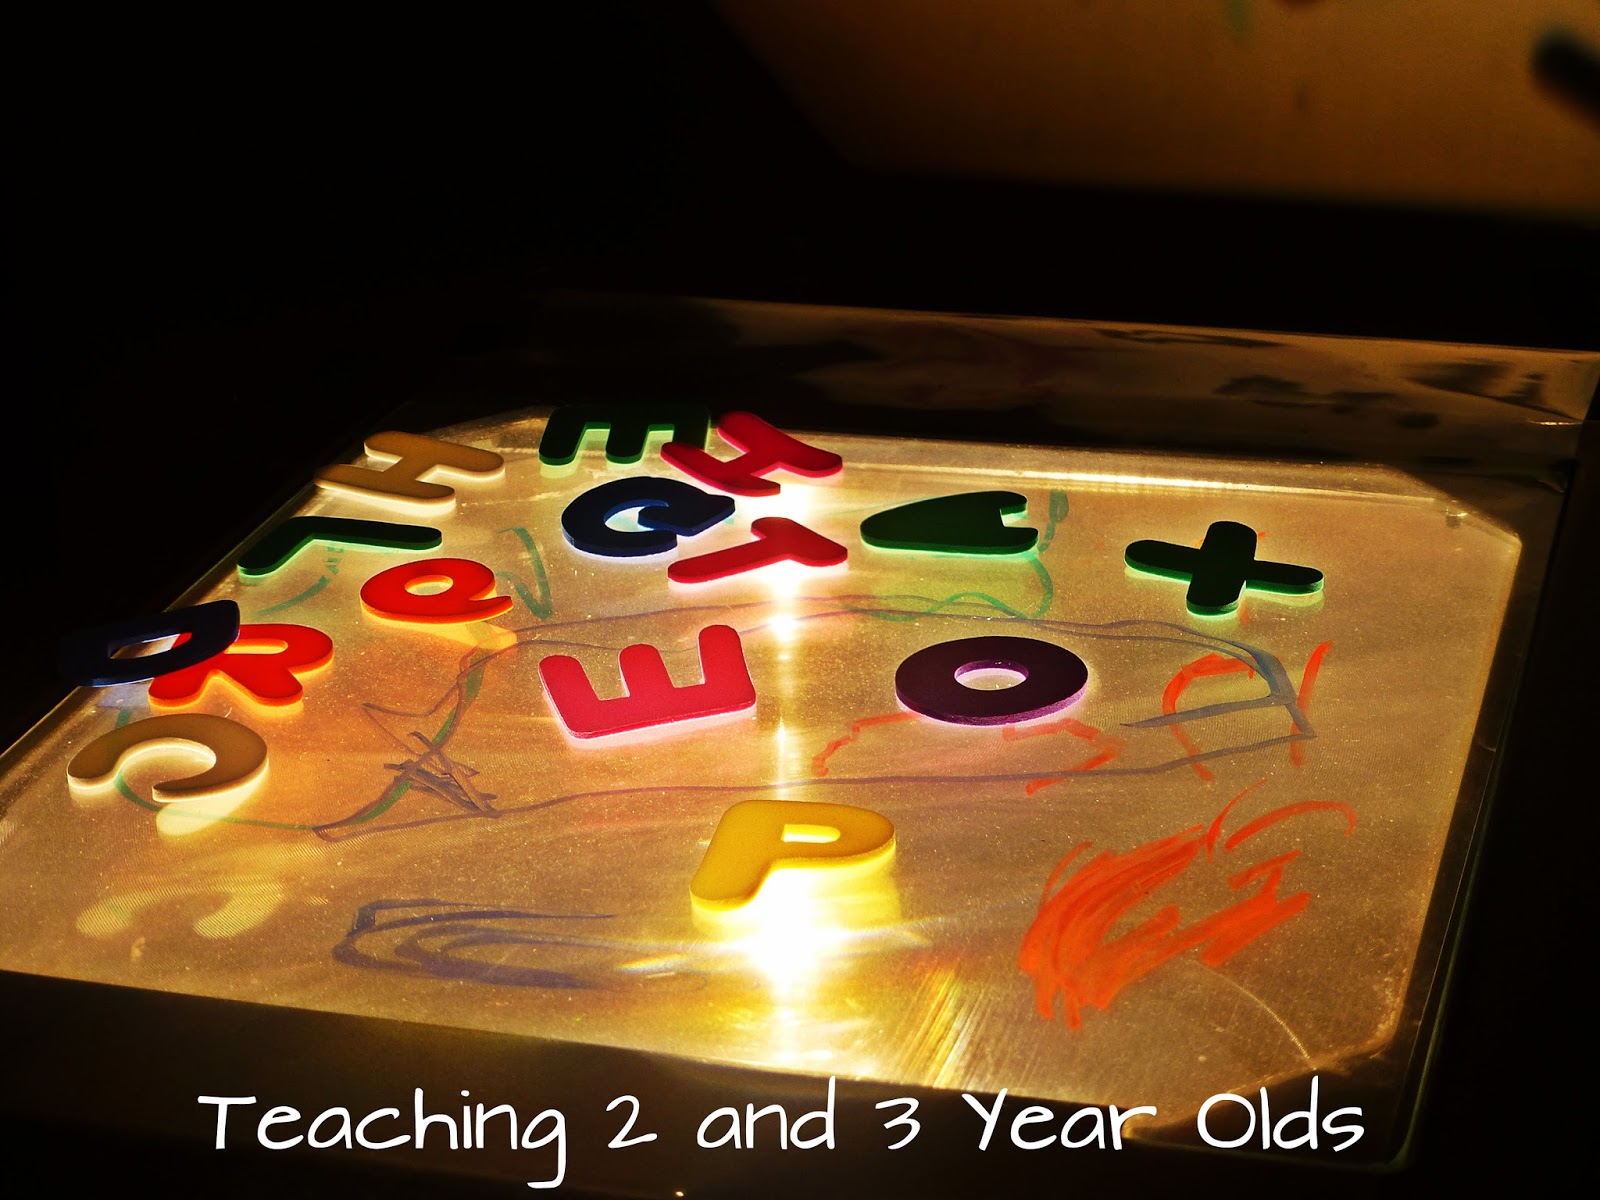 Over 25 Light Table Activities for Preschool - Teaching 2 and 3 year olds